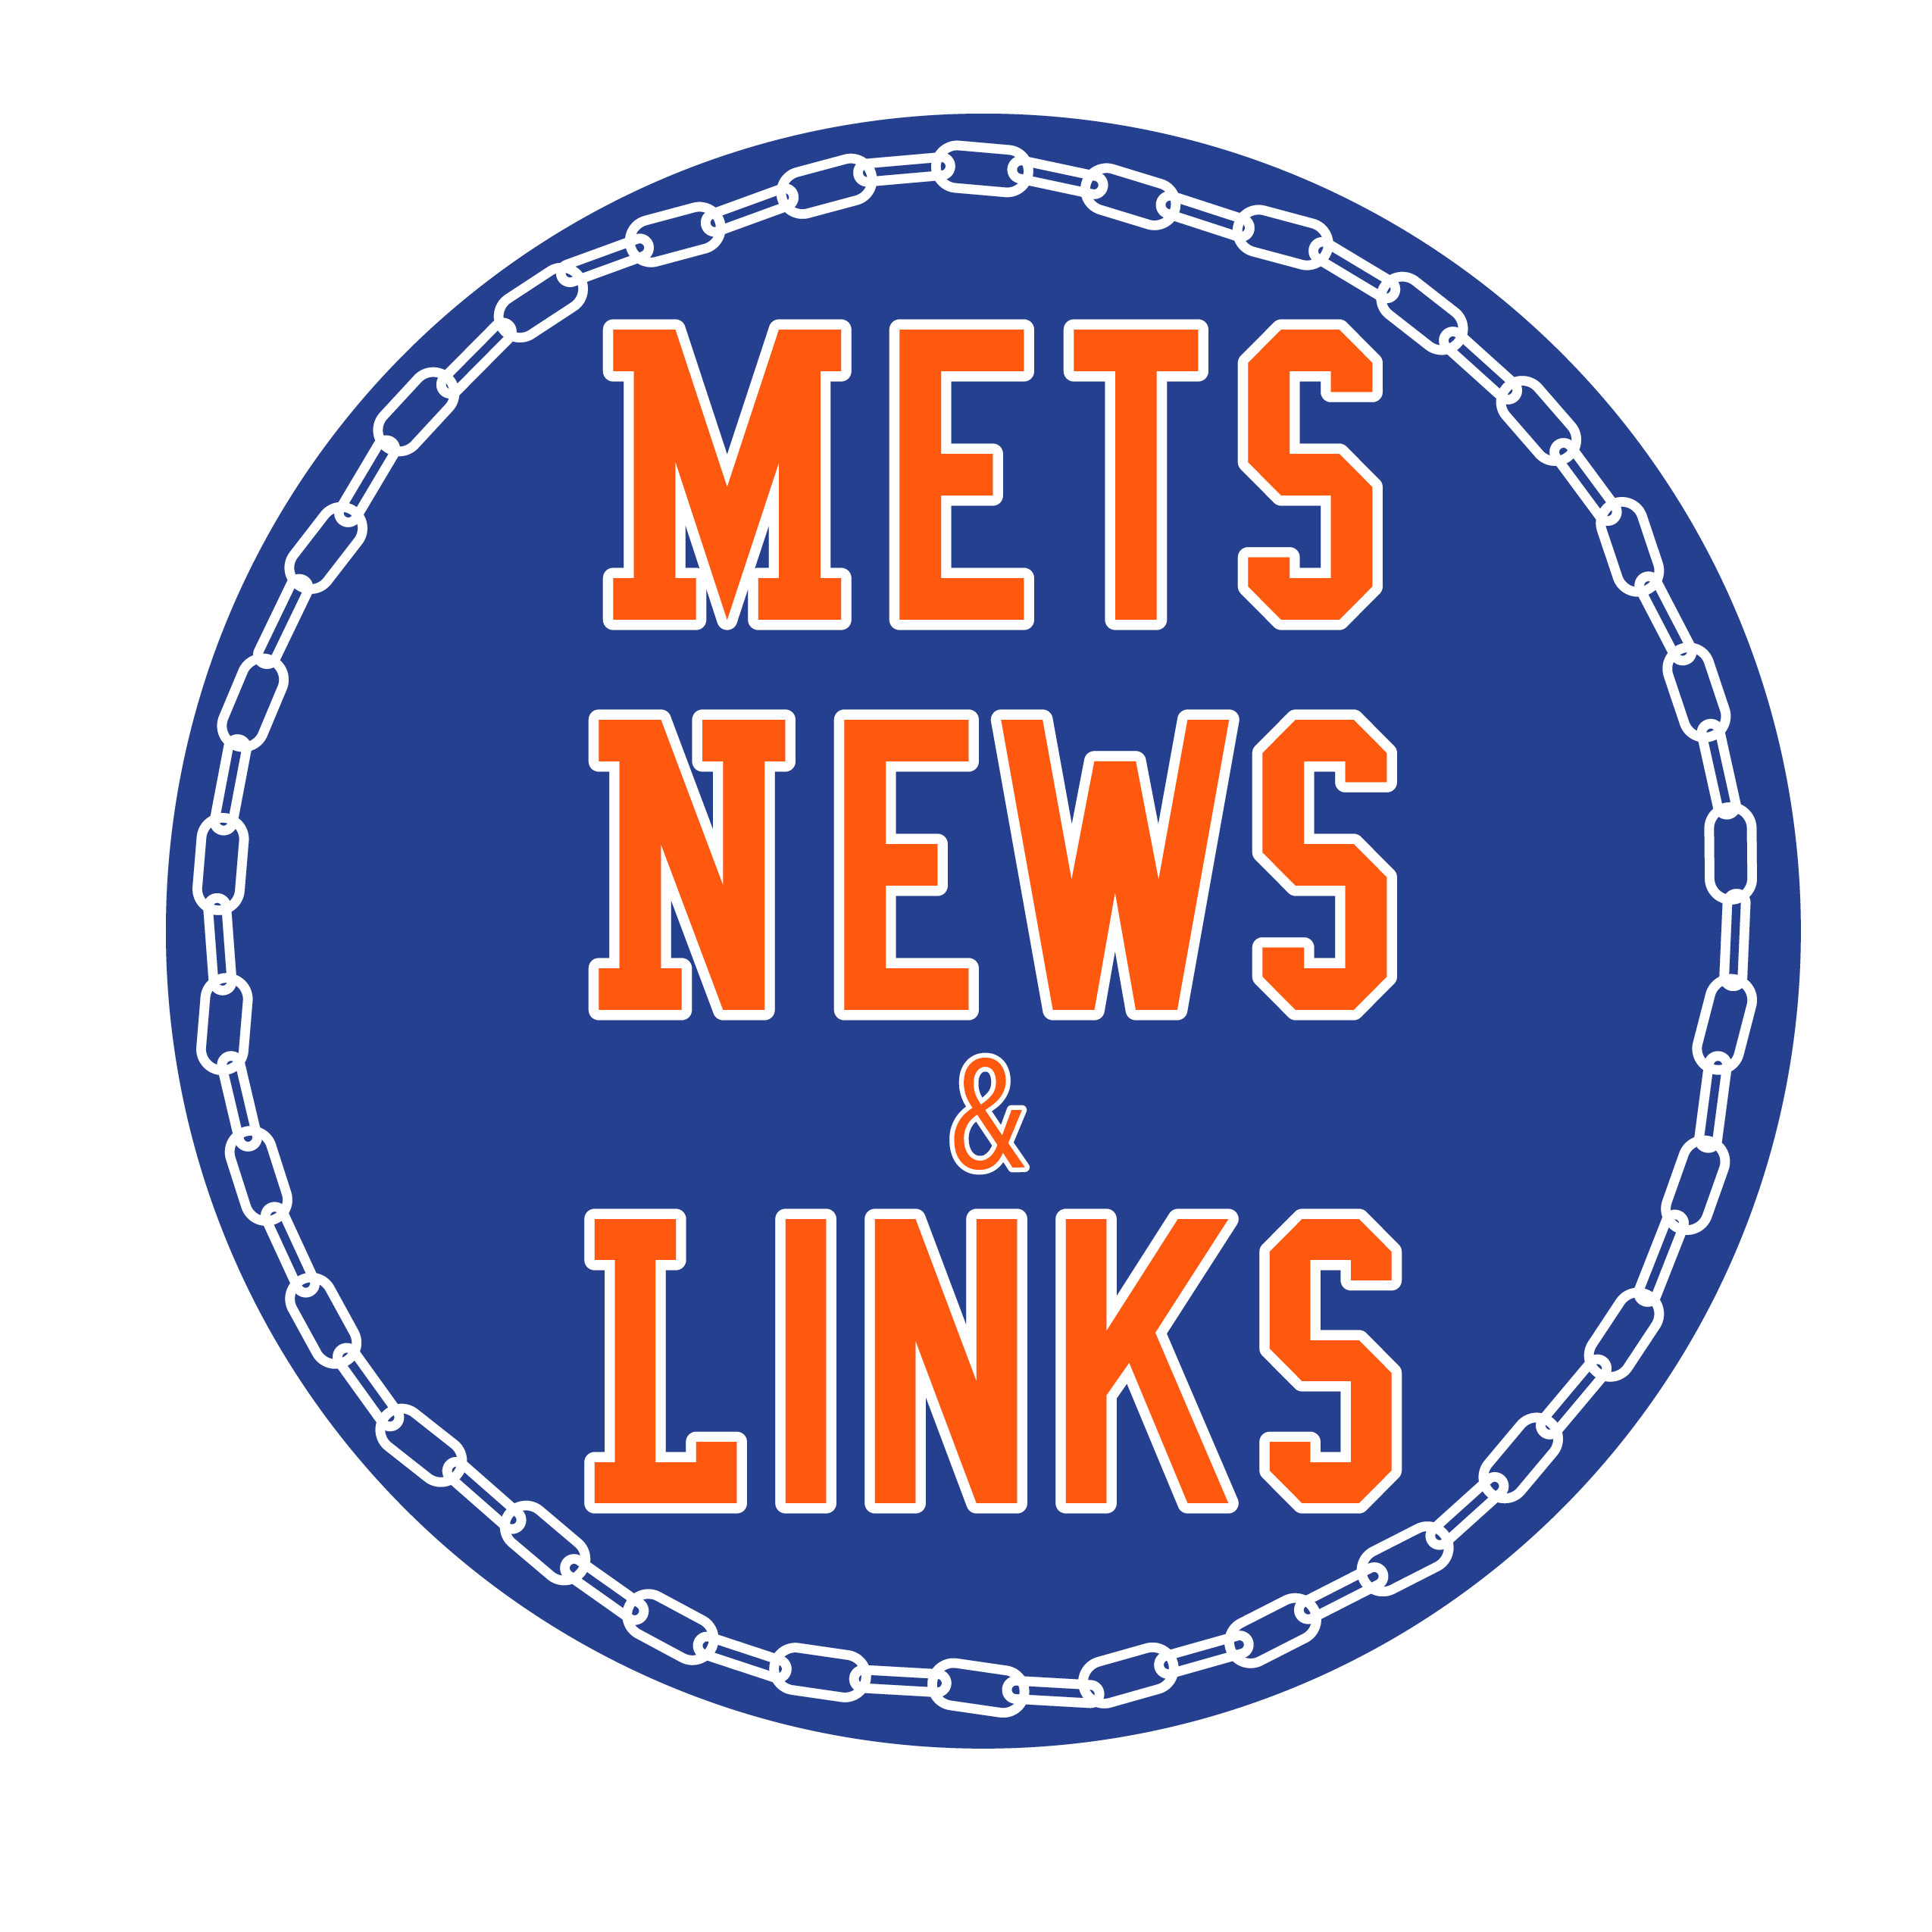 Artwork for Mets News And Links